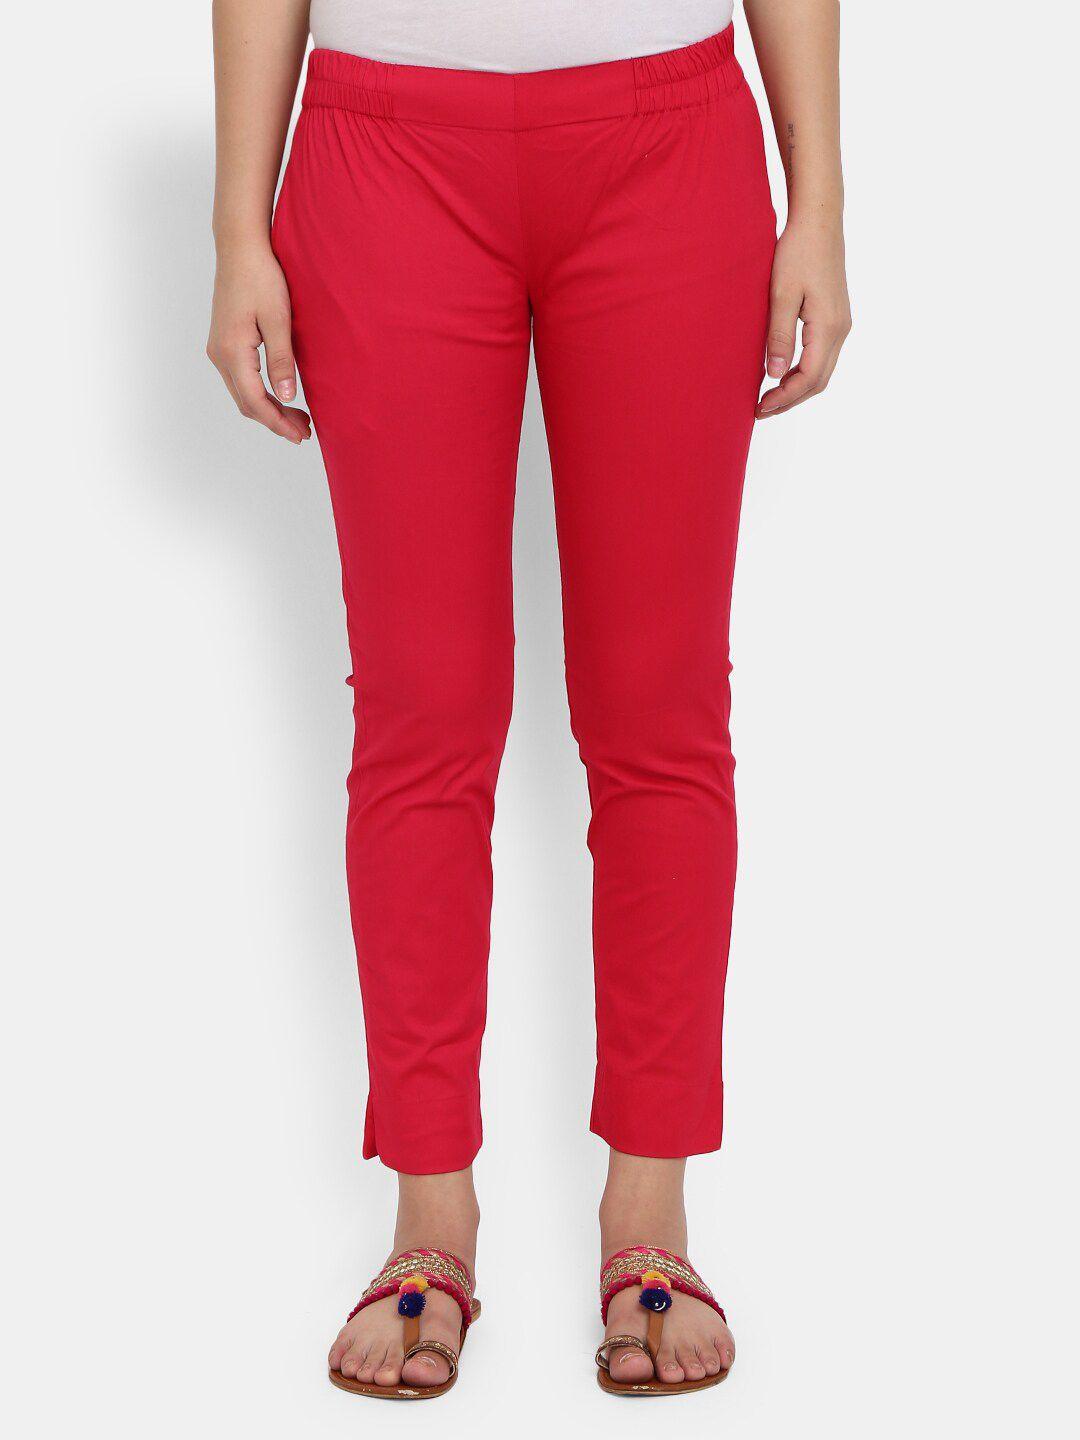 v-mart women red solid slim fit trousers